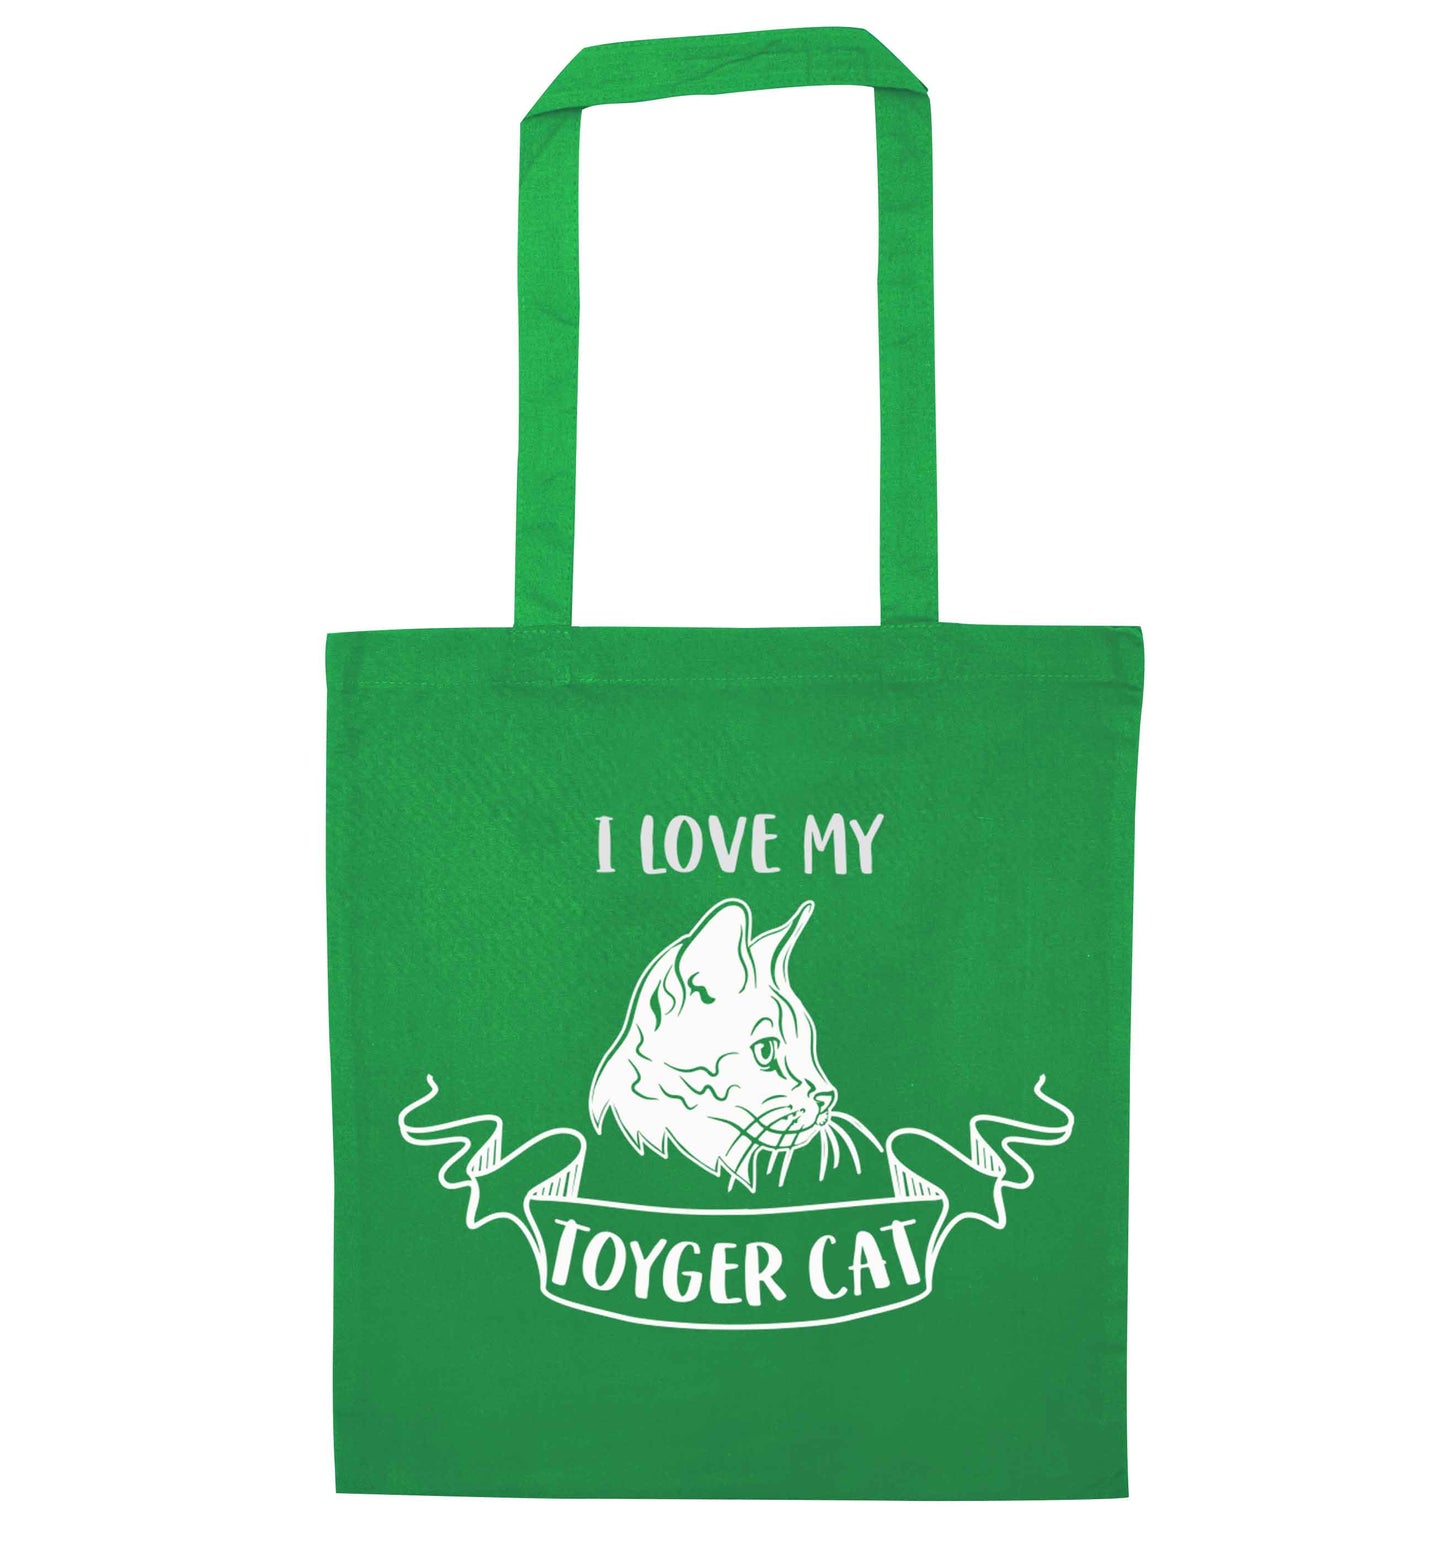 I love my toyger cat green tote bag